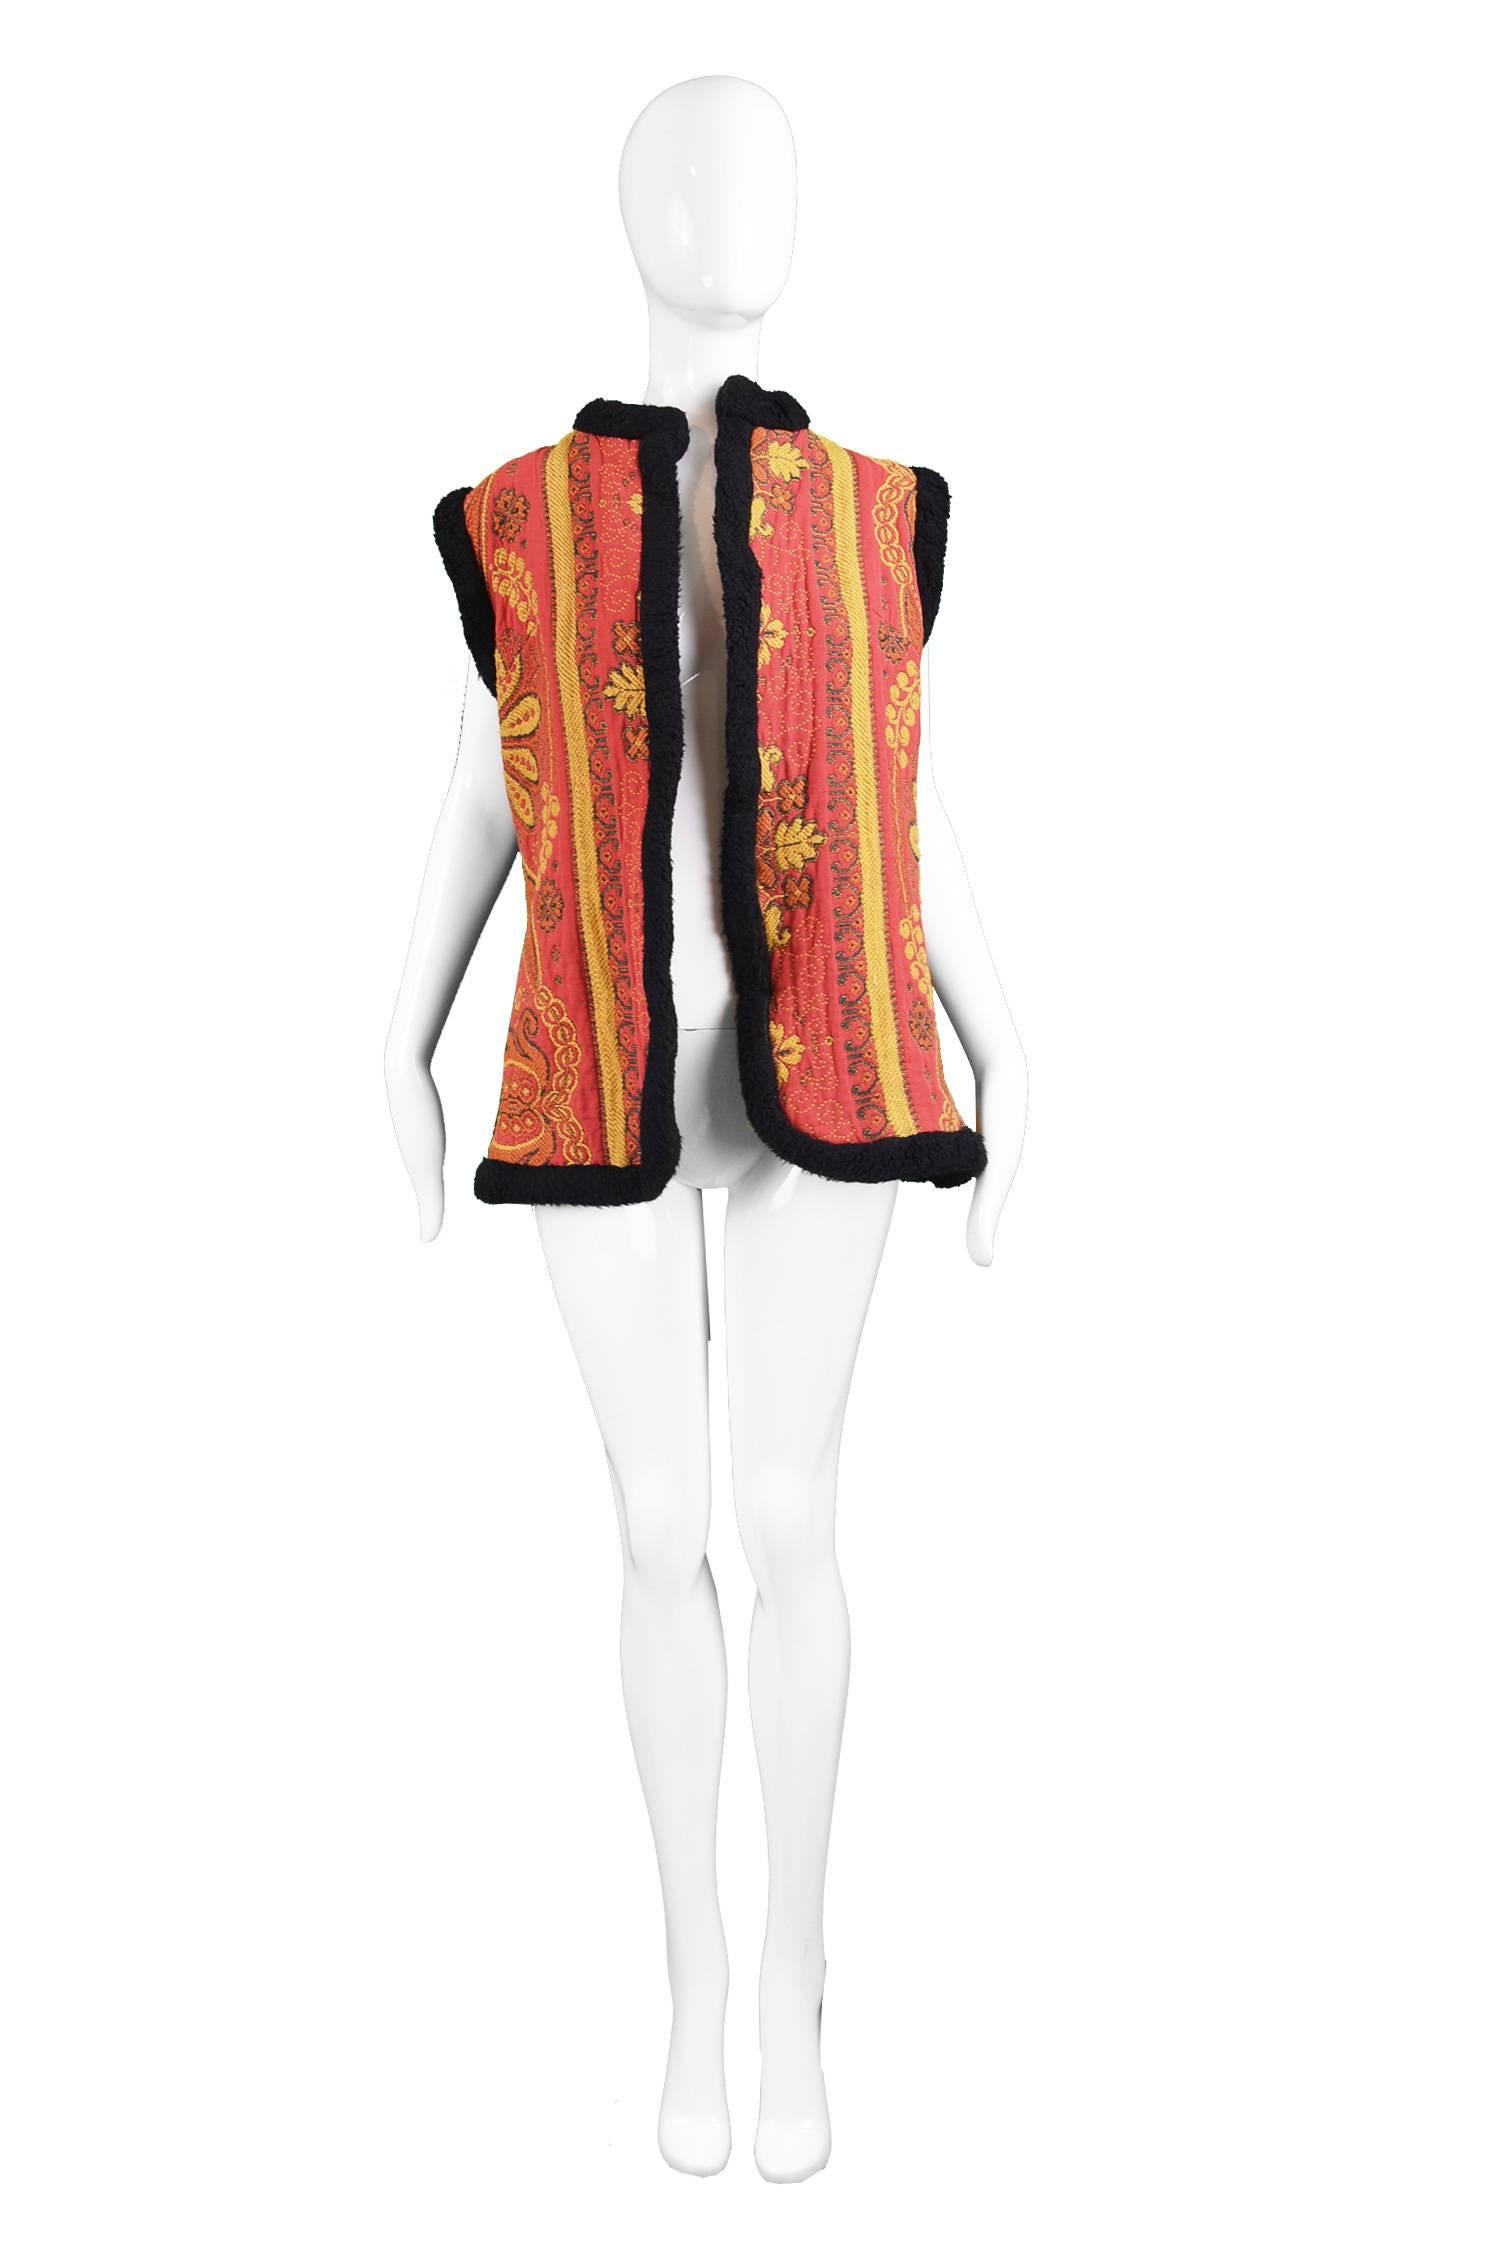 A bohemian vintage vest / waistcoat from the late 60s by British boutique label, Manon Maid of London. In a red floral tapestry fabric with a faux shearling trim around the sleeves and down the open front. In an afghan inspired style similar to the